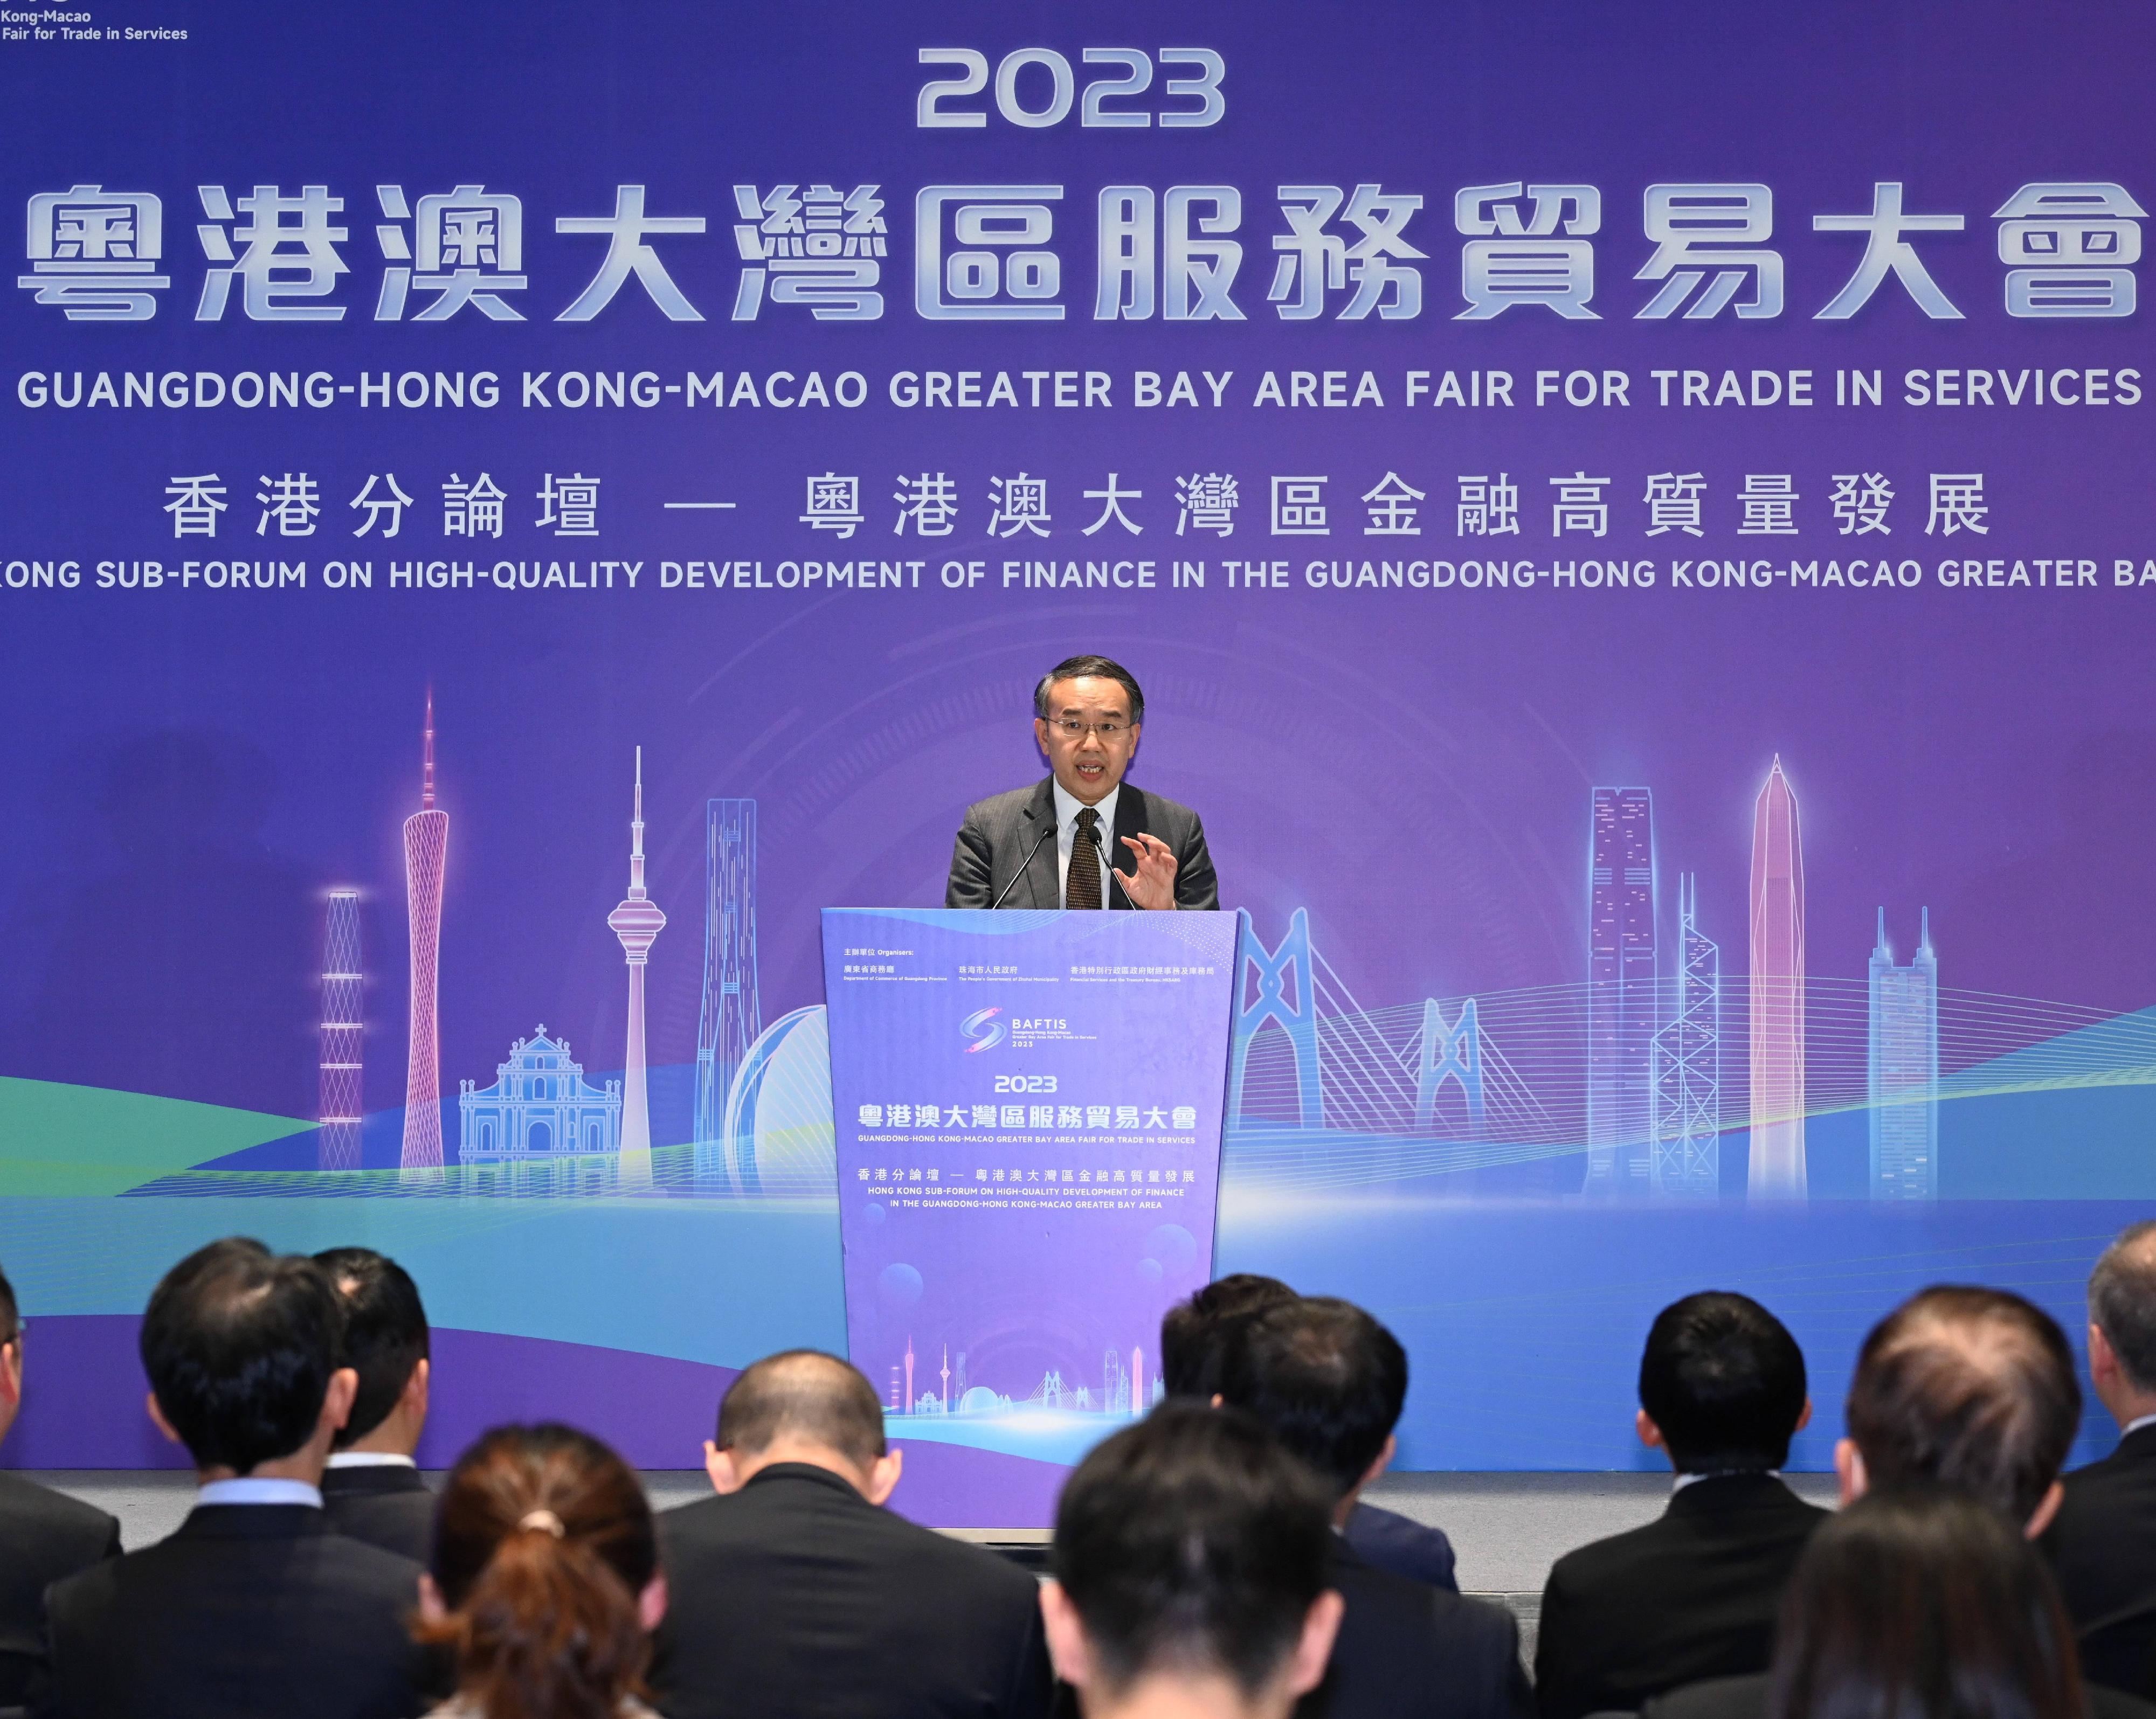 The Financial Services and the Treasury Bureau, the Department of Commerce of Guangdong Province and the People’s Government of Zhuhai Municipality, today (December 7) jointly held the Hong Kong Sub-forum of the 2023 Guangdong-Hong Kong-Macao Greater Bay Area Fair for Trade in Services. Photo shows the Secretary for Financial Services and the Treasury, Mr Christopher Hui, speaking at the Sub-forum.